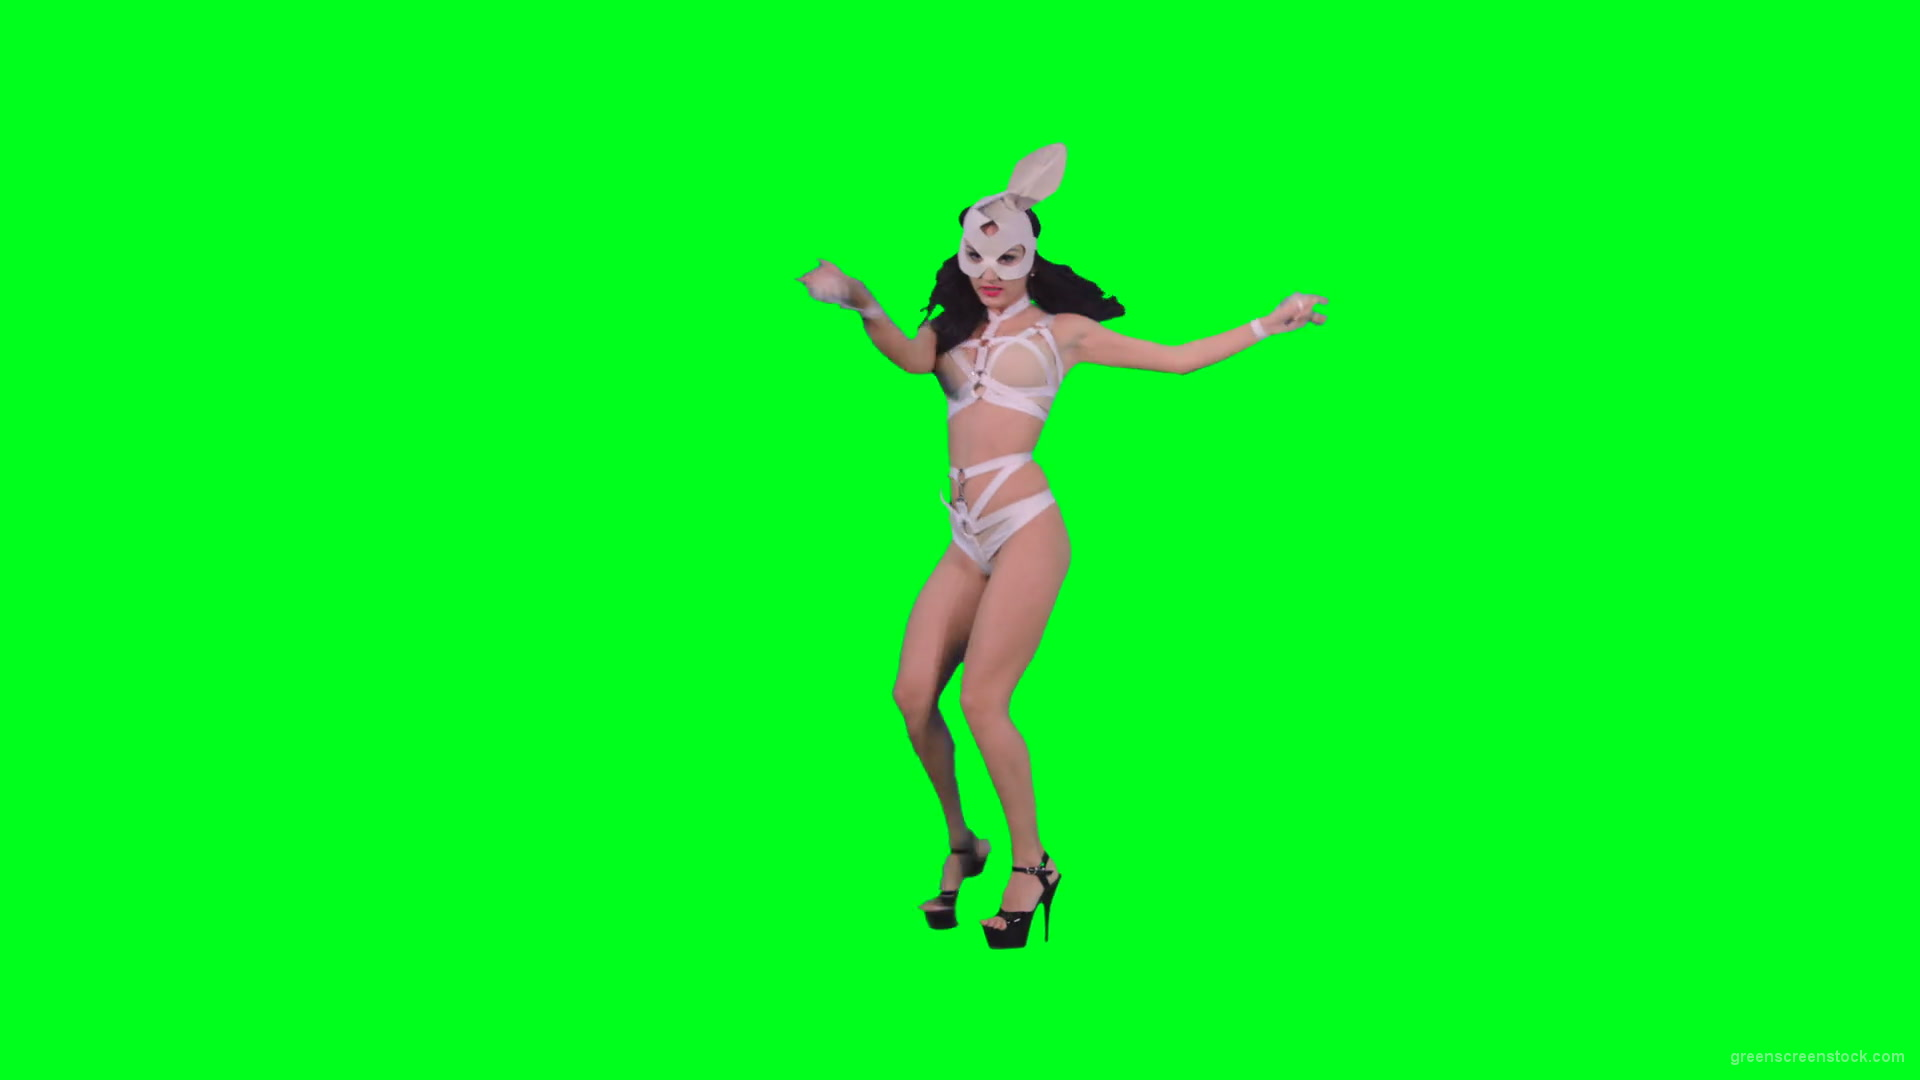 Black-hair-sexy-girl-in-playboy-costume-dancing-go-go-on-green-screen-4K-Video-Footage-1920_005 Green Screen Stock